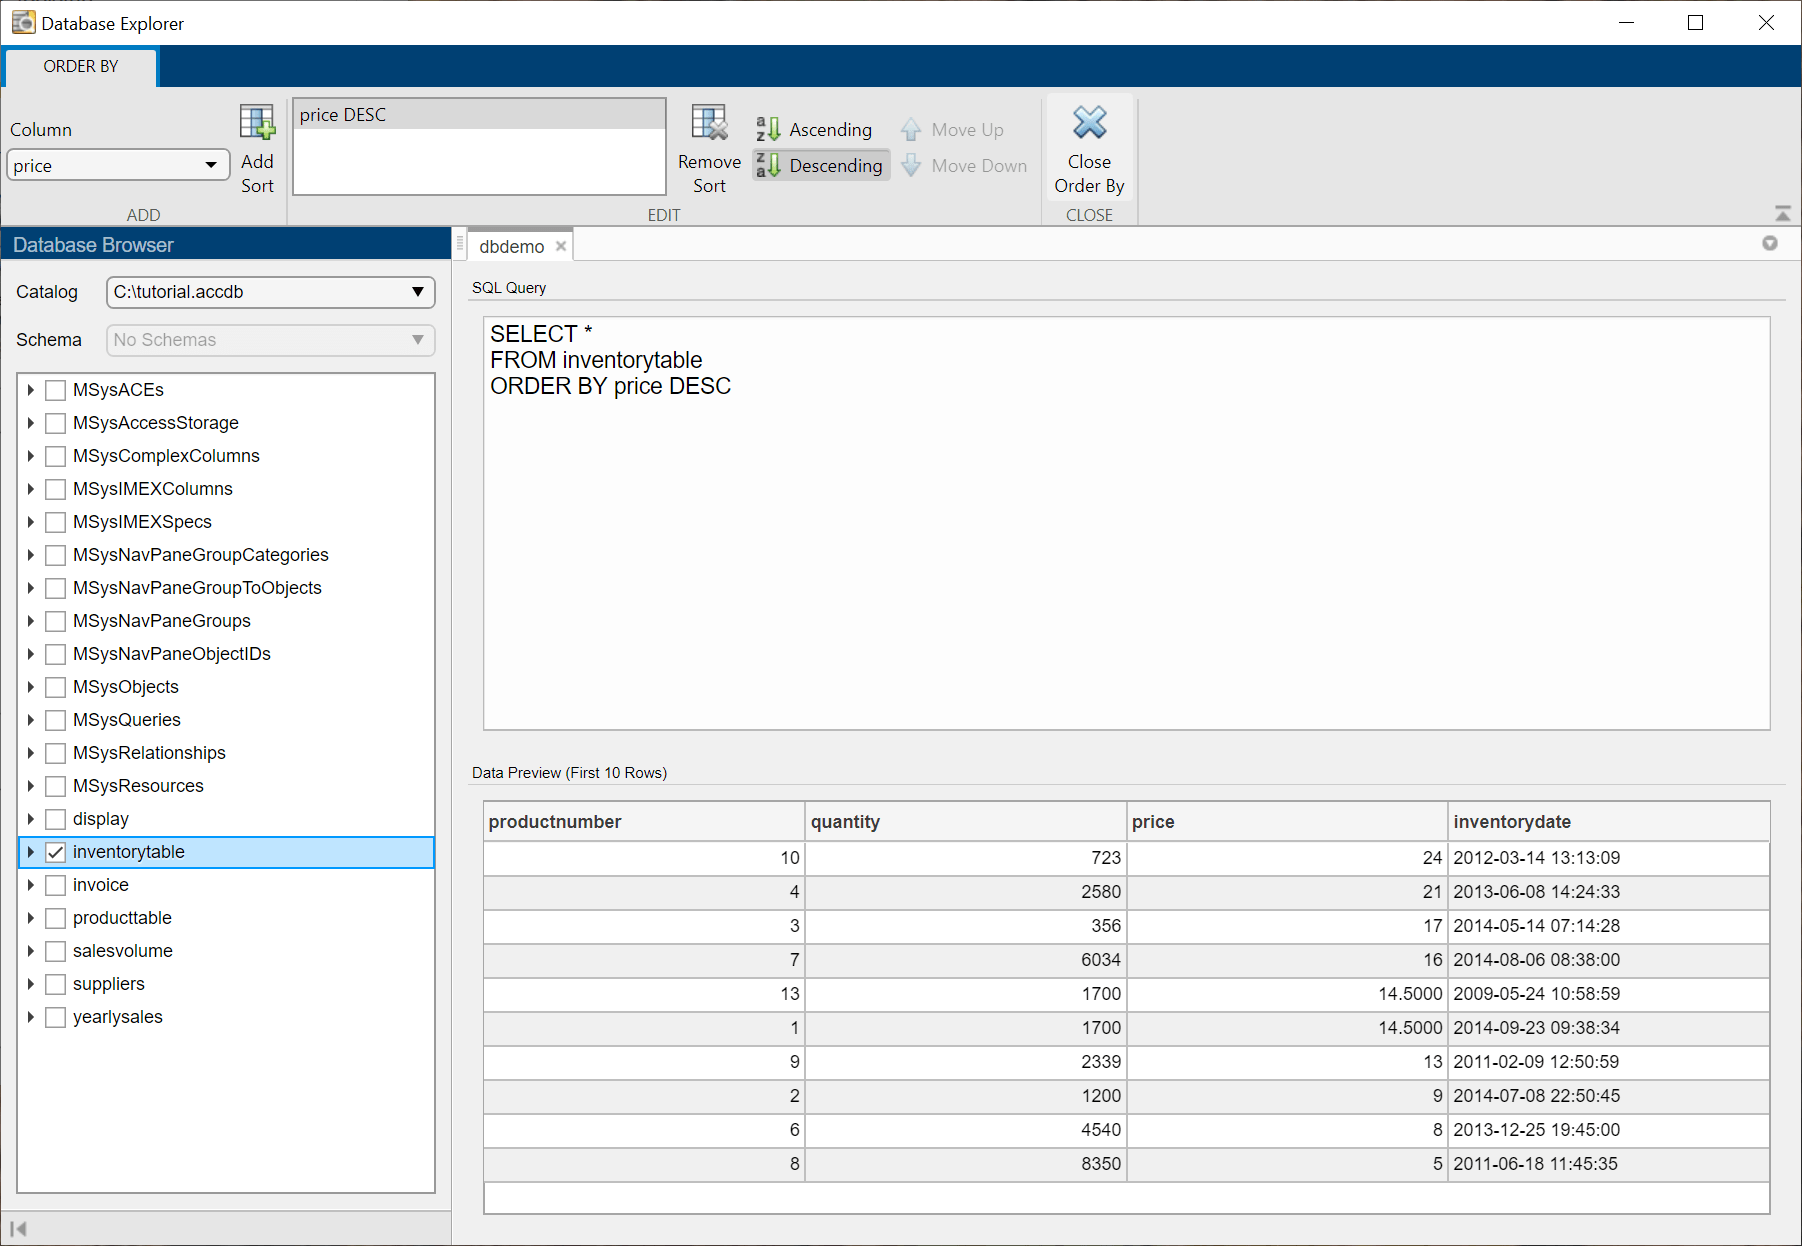 The Database Browser pane shows the selected table inventoryTable in the Database Explorer app. The SQL Query pane shows the SQL SELECT statement to select all data in the table sorted by the price column in descending order. The Data Preview pane displays the data for the first 10 rows in the table sorted by the values in the price column in descending order.